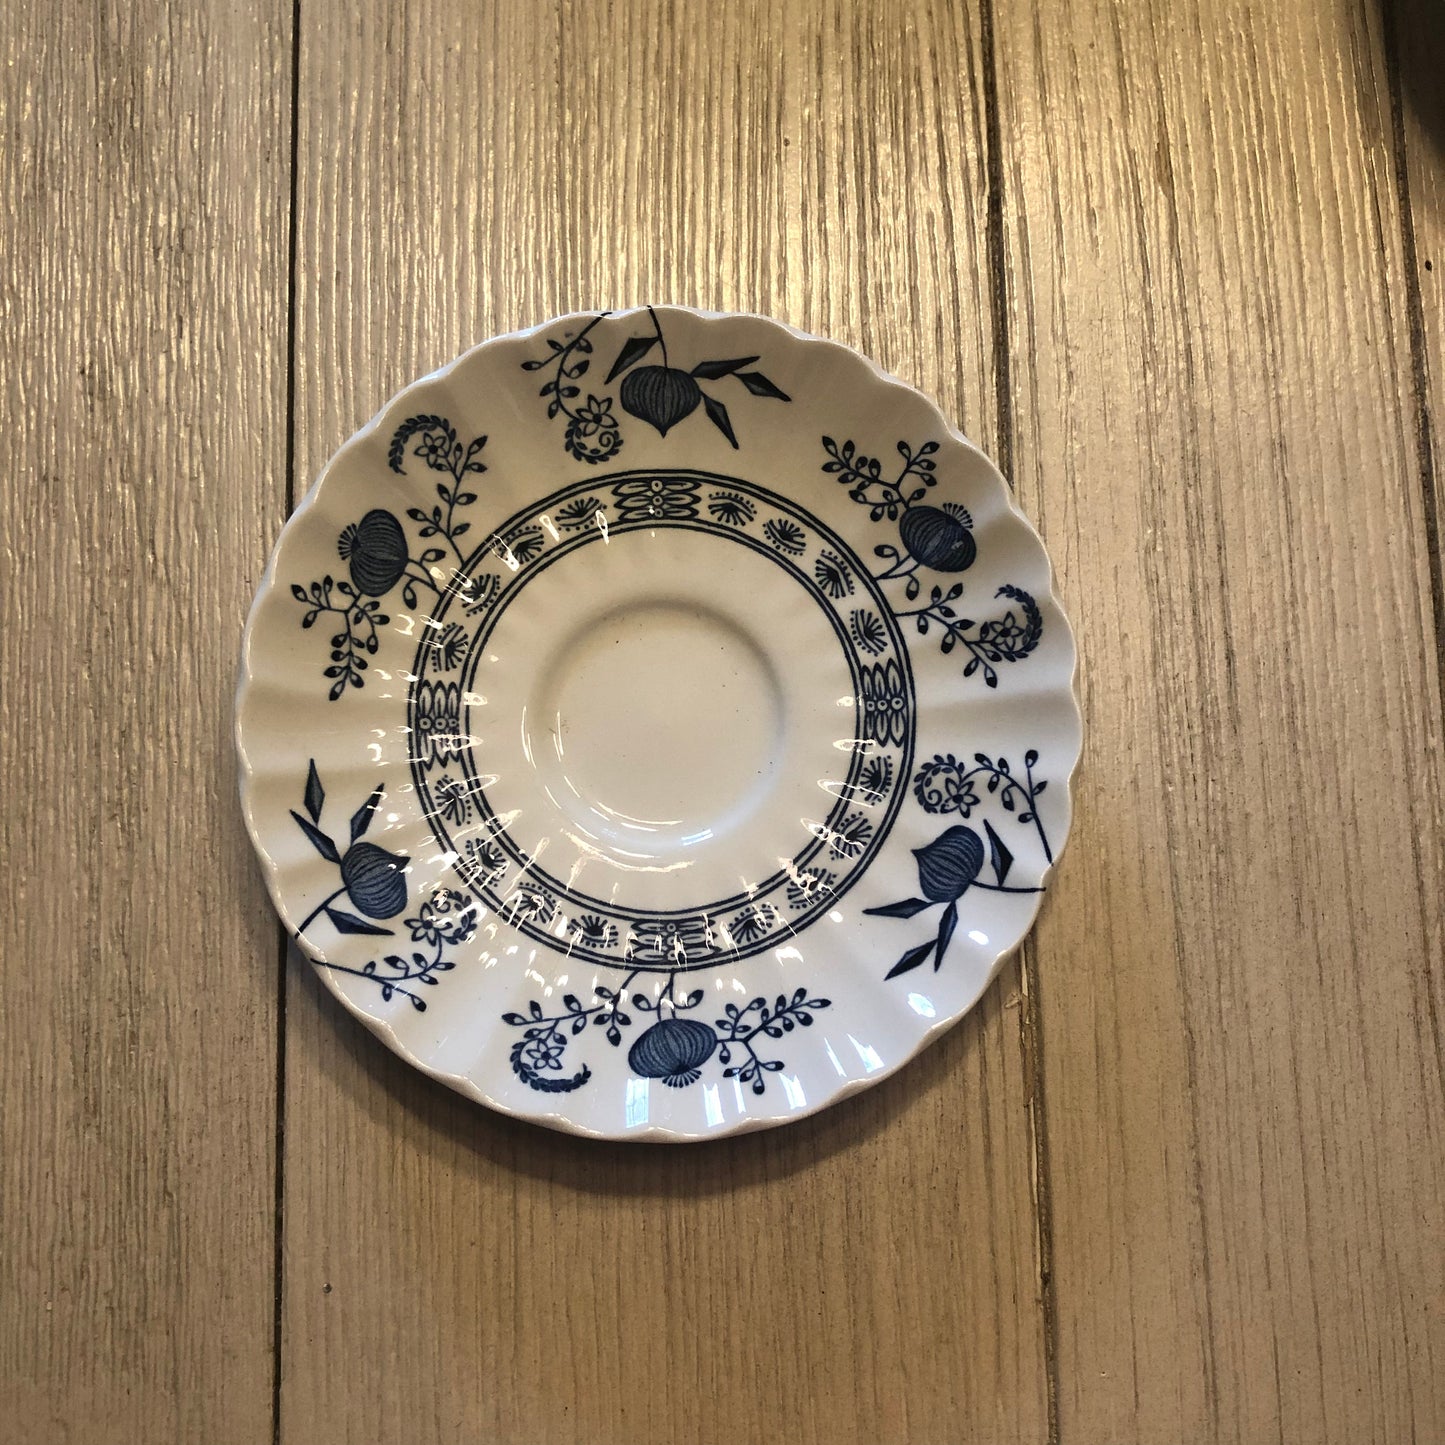 J&G Meakin Blue Onion/Nordic Ware Saucers